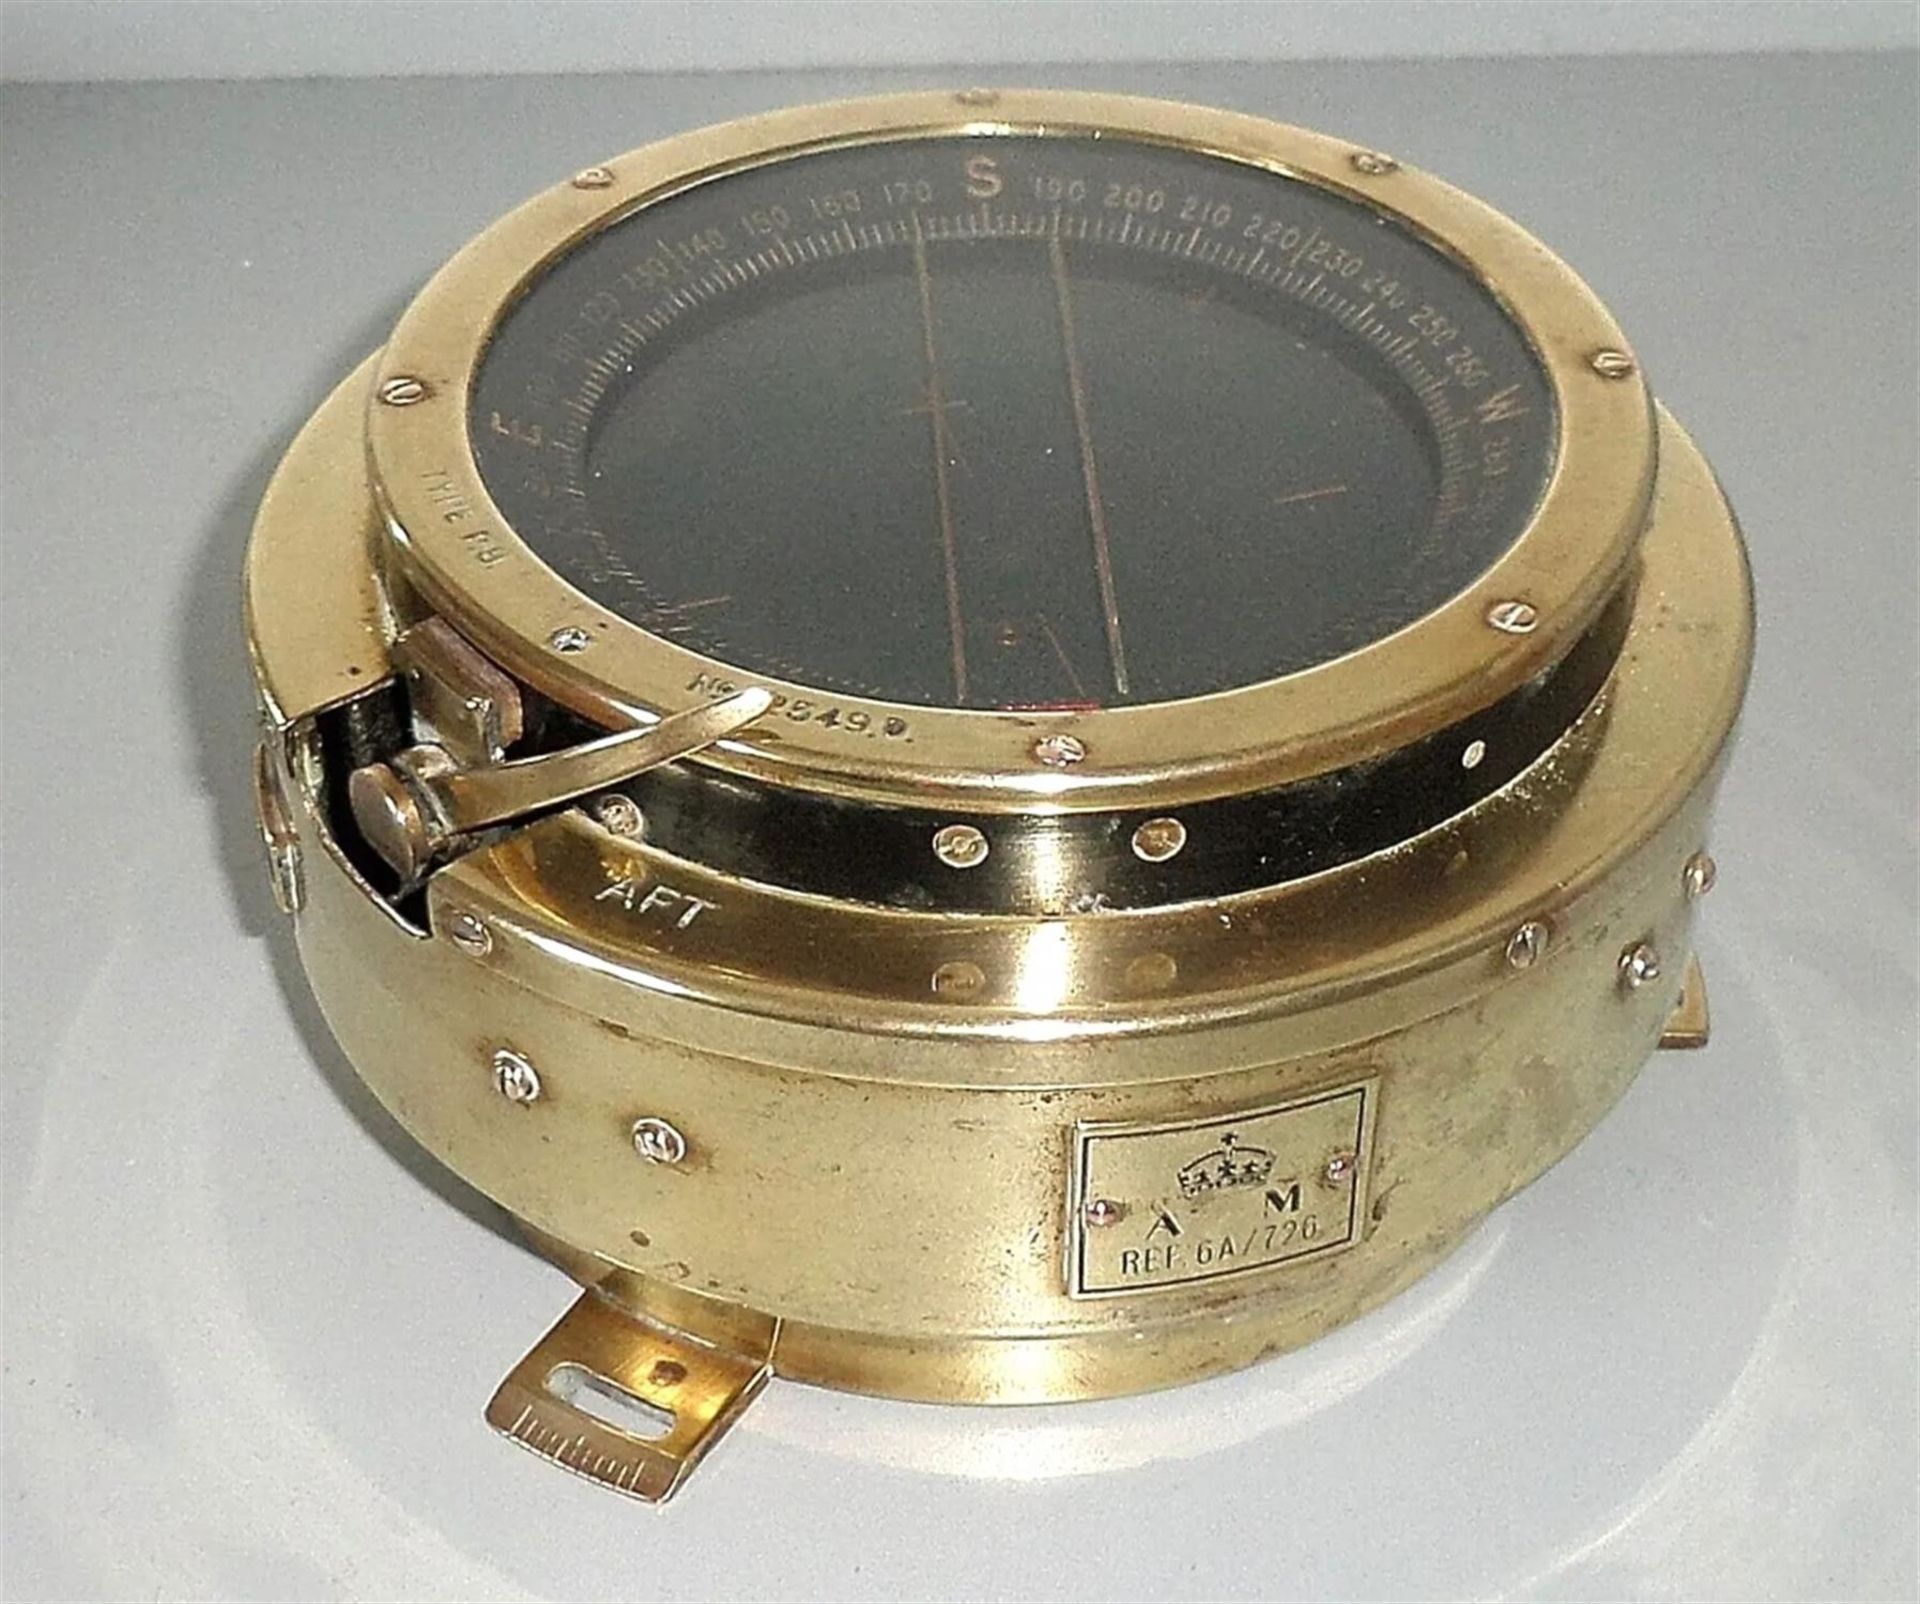 WWII Spitfire Compass- Air Ministry, Type P-8 REF. 6A/726 dating to 1943 - Image 5 of 9